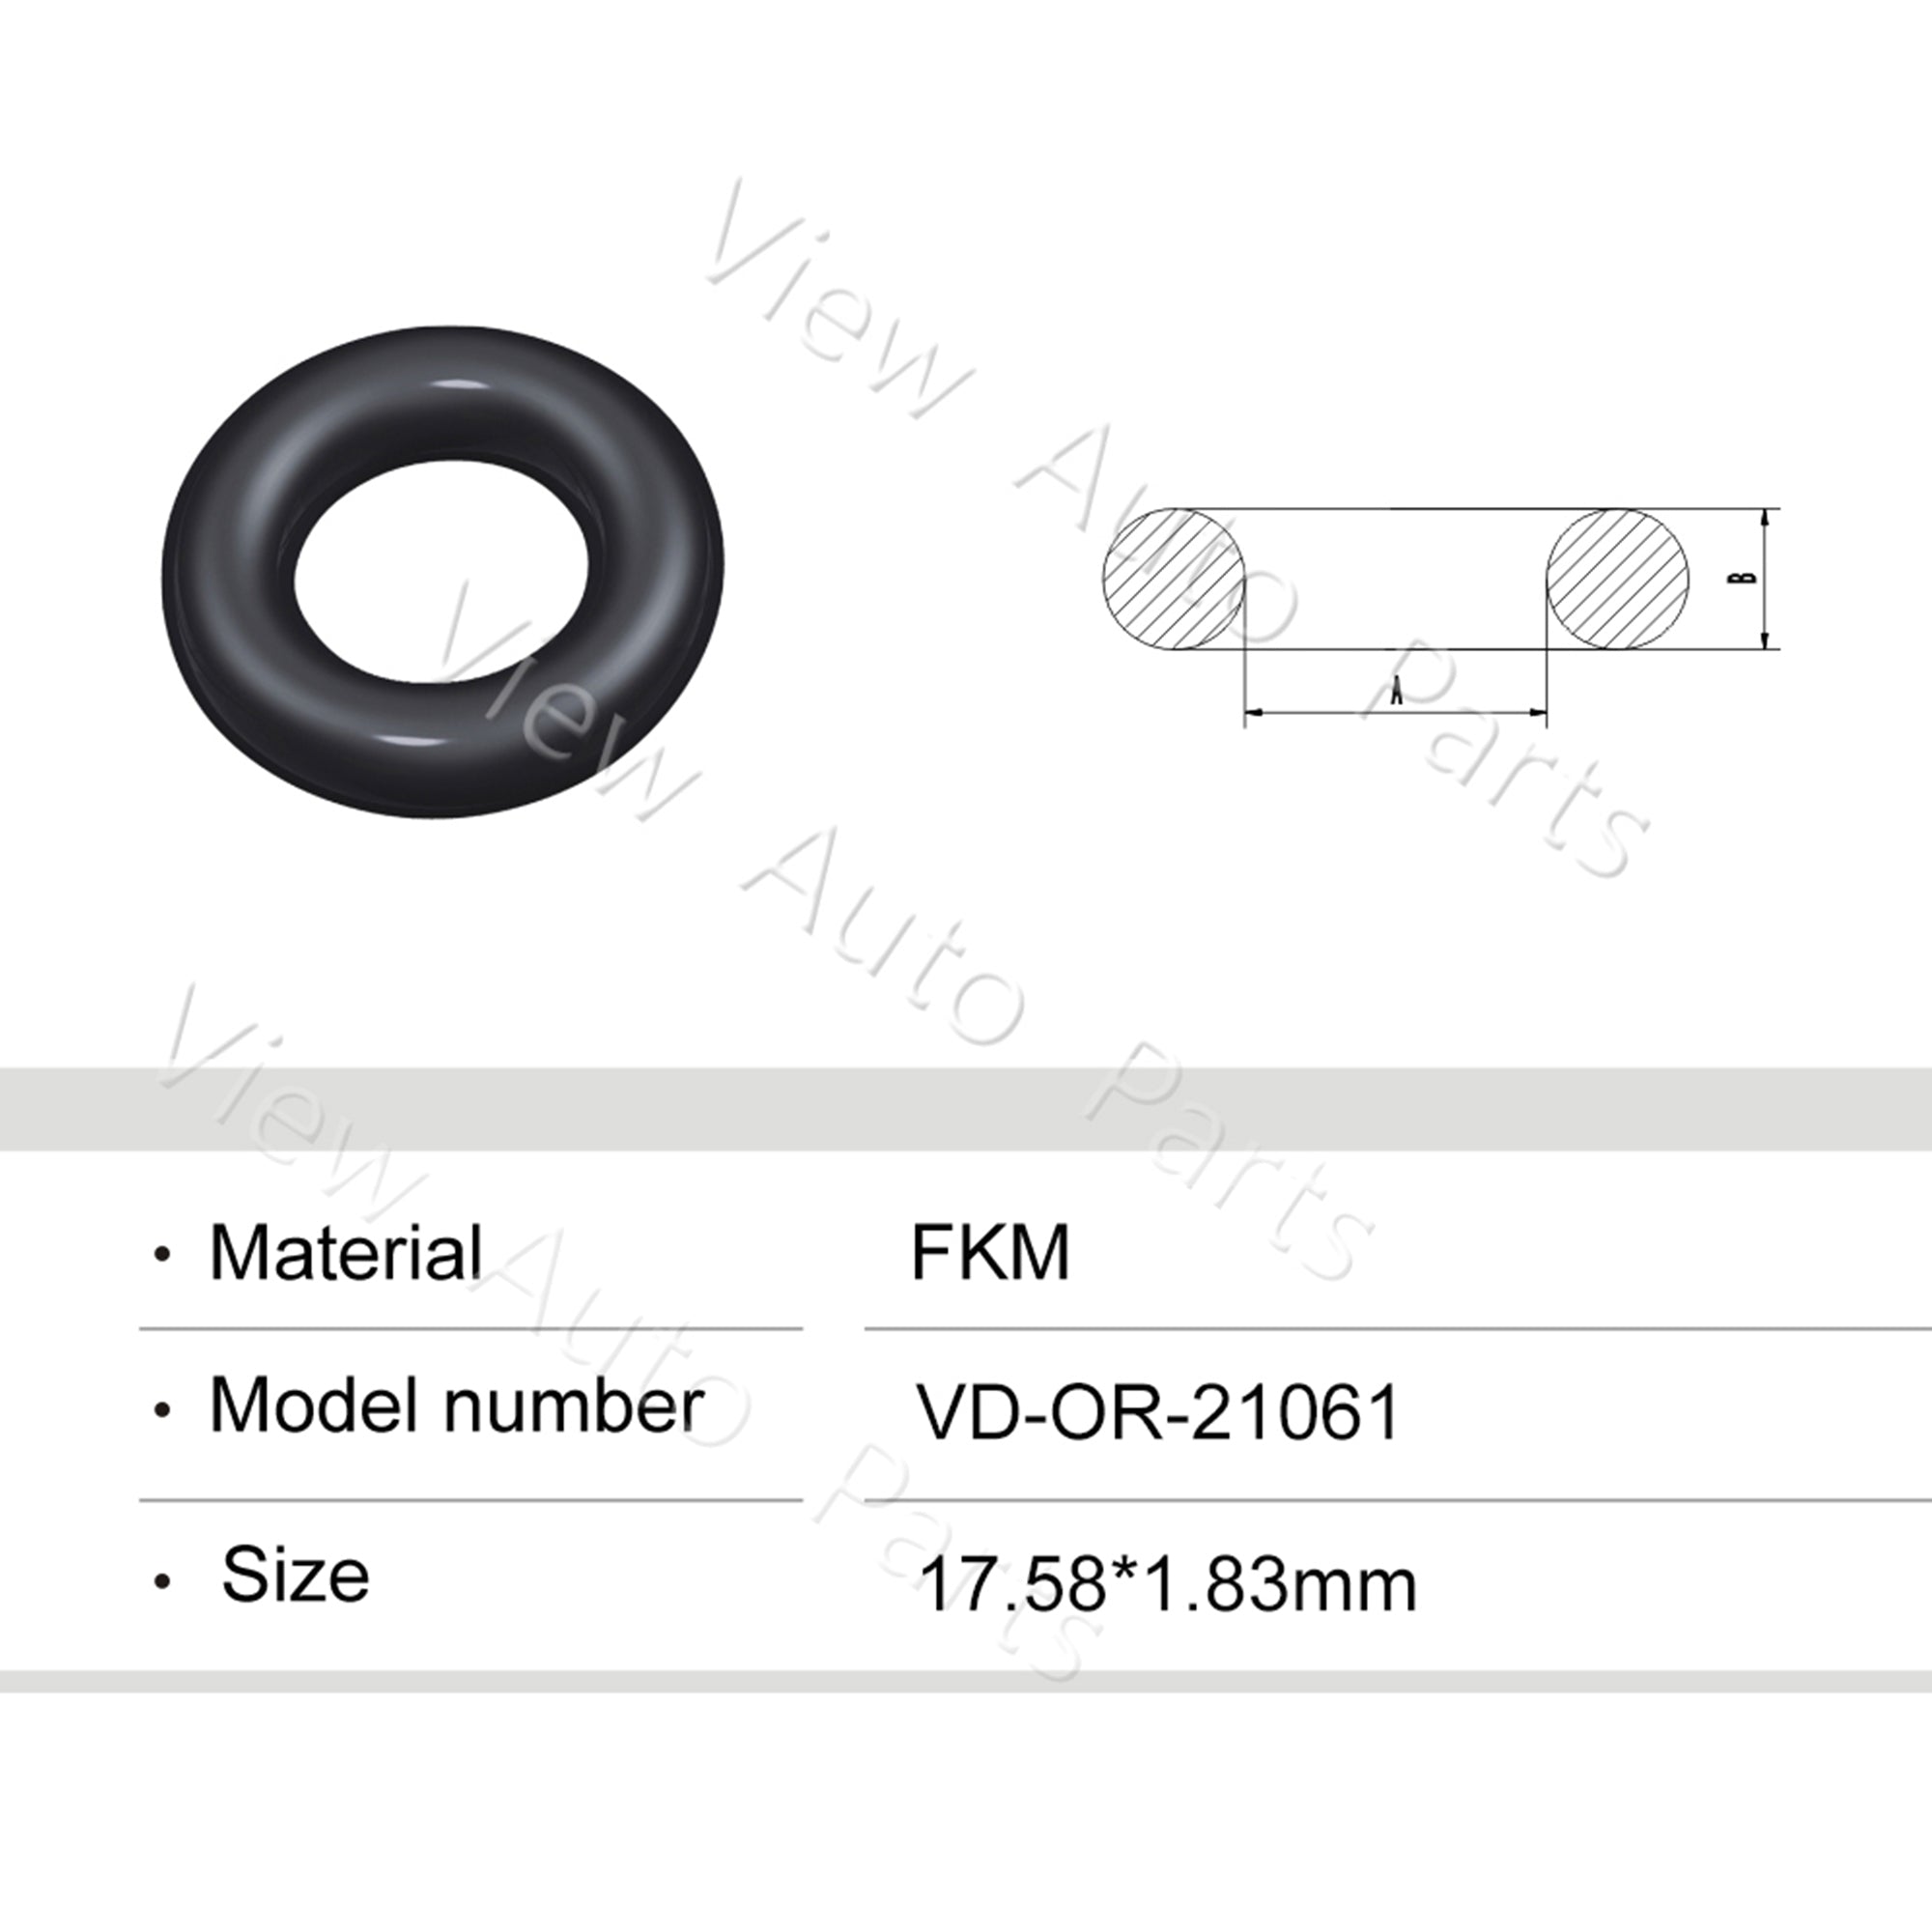 Fuel Injector Rubber Seal Orings for Fuel Injector Repair Kits FKM & Rubber Heat Resistant, Size: 17.58*1.83mm OR-21061